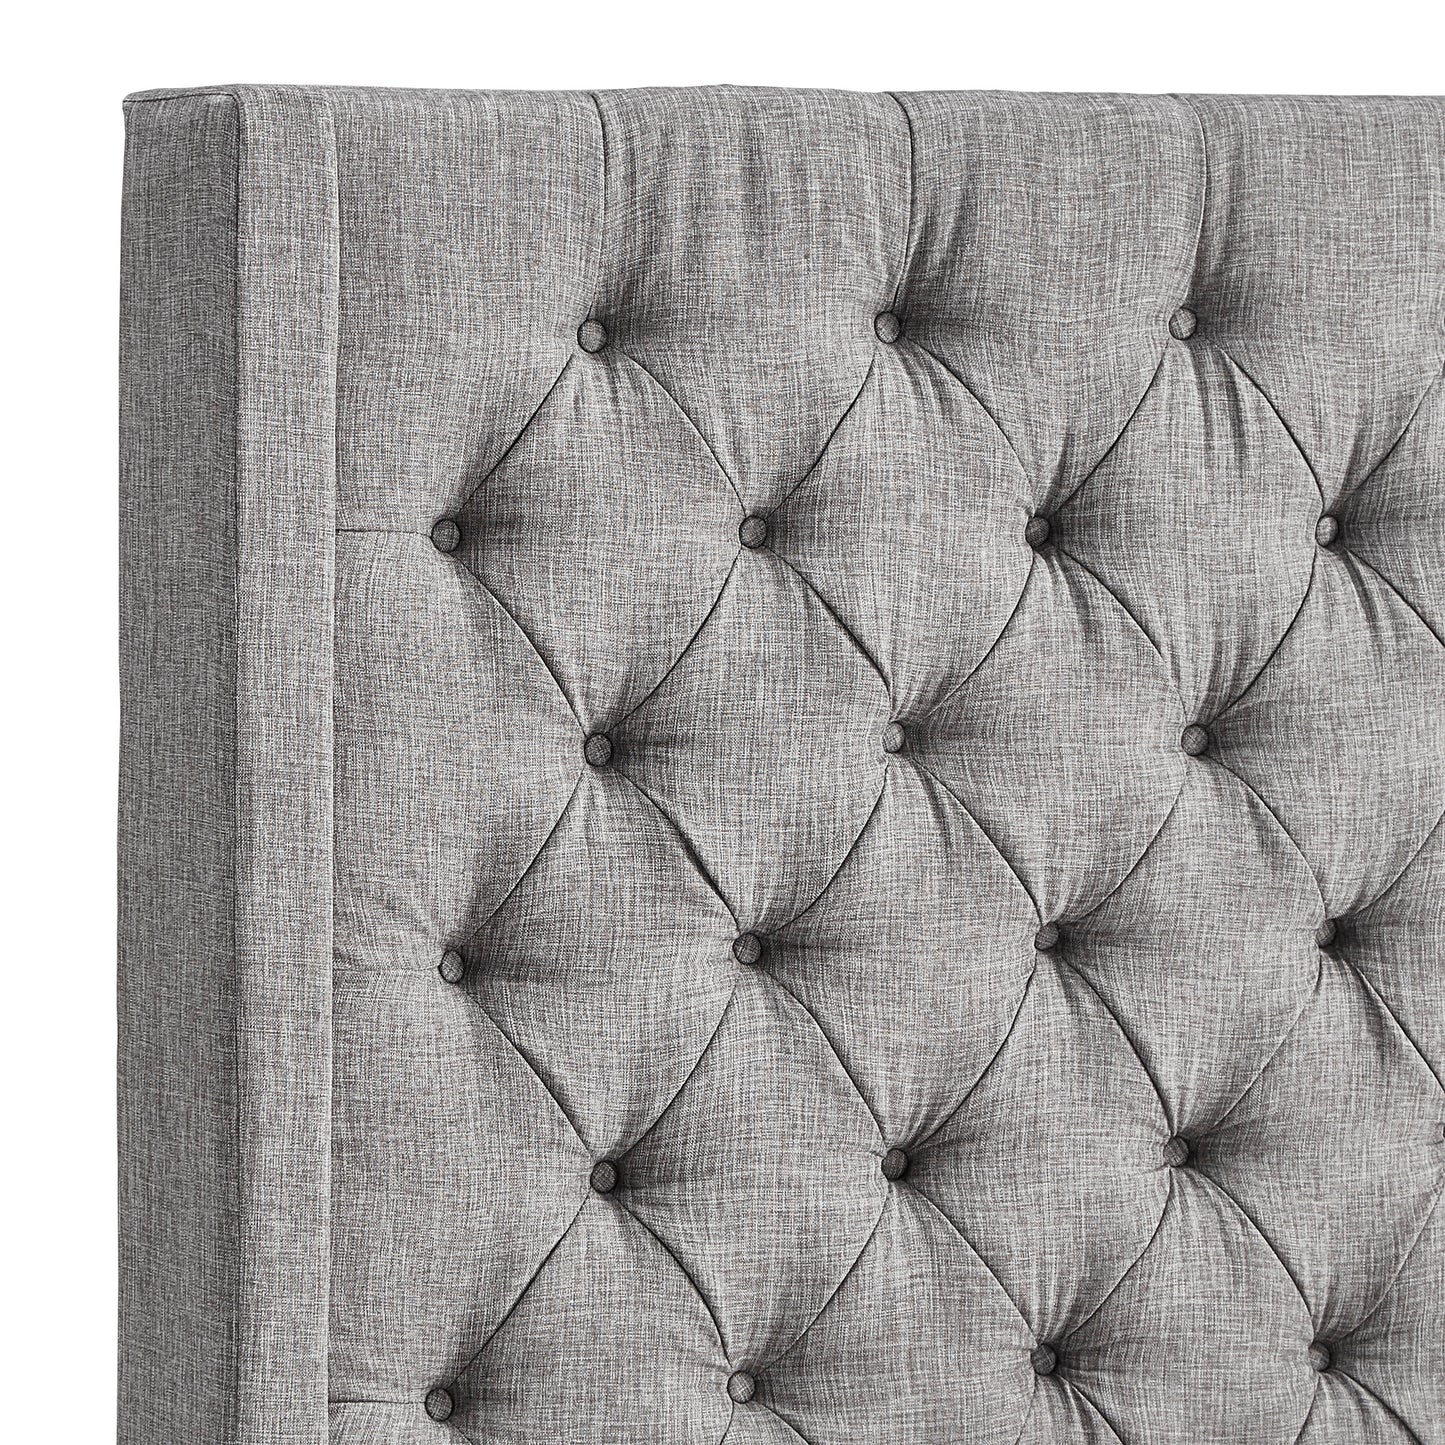 Wingback Button Tufted 84" Tall Headboard Bed - Grey Linen, Queen